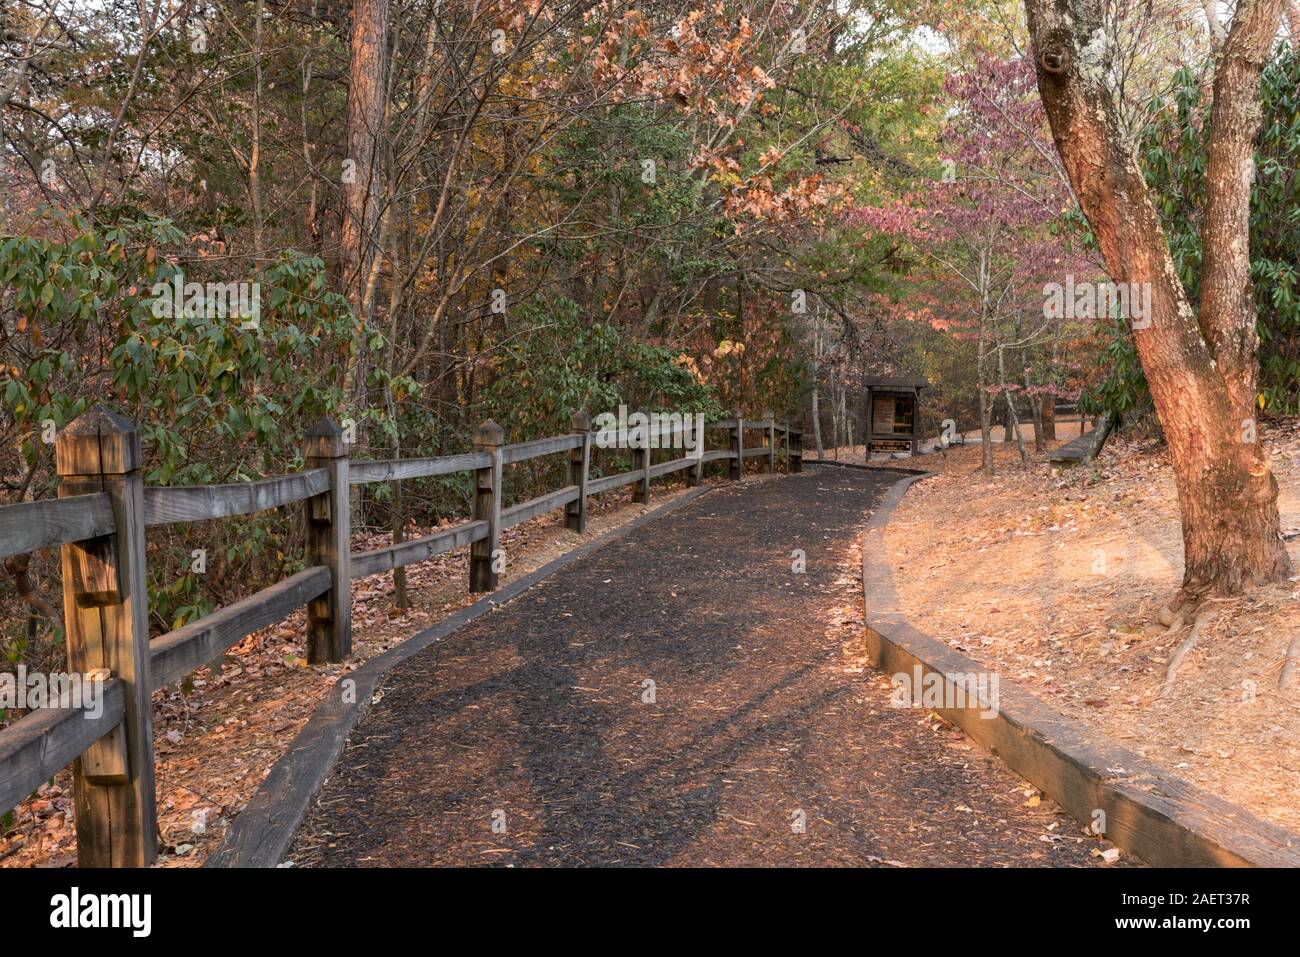 Pedestrian trail made of recycled tires shot at Tallulah Gorge State Park in the North Georgia USA Appalachian Mountain range. Stock Photo